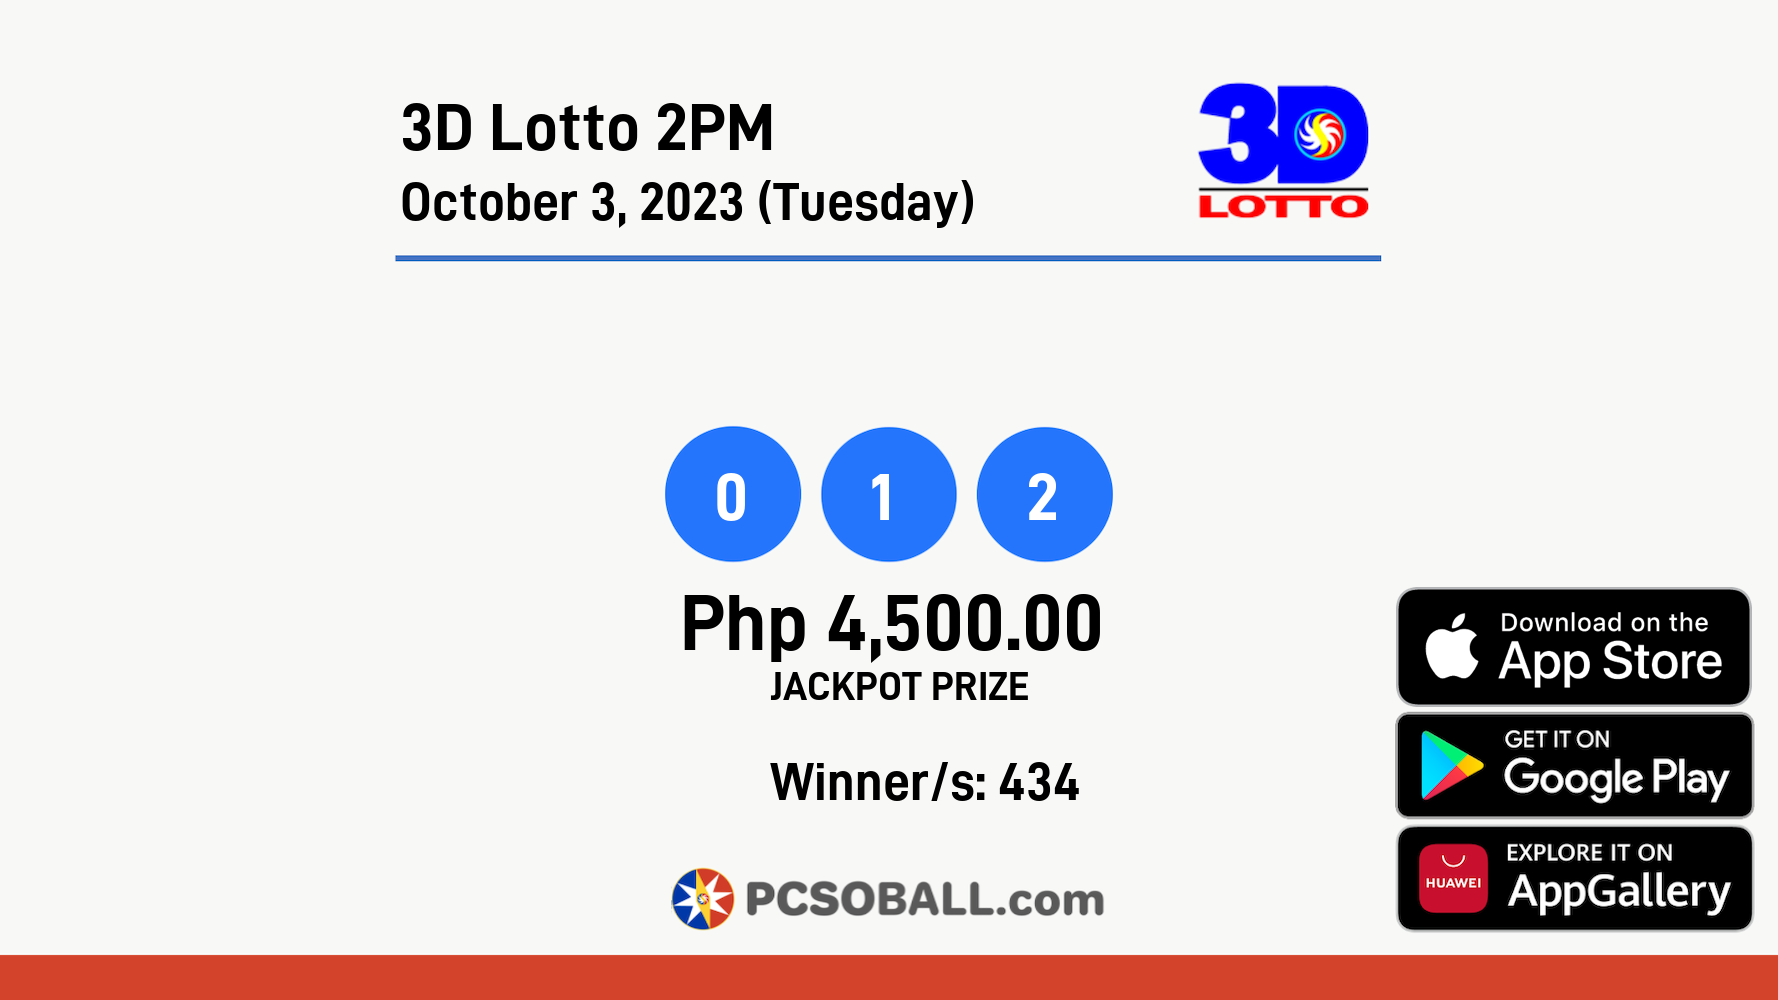 3D Lotto 2PM October 3, 2023 (Tuesday) Result